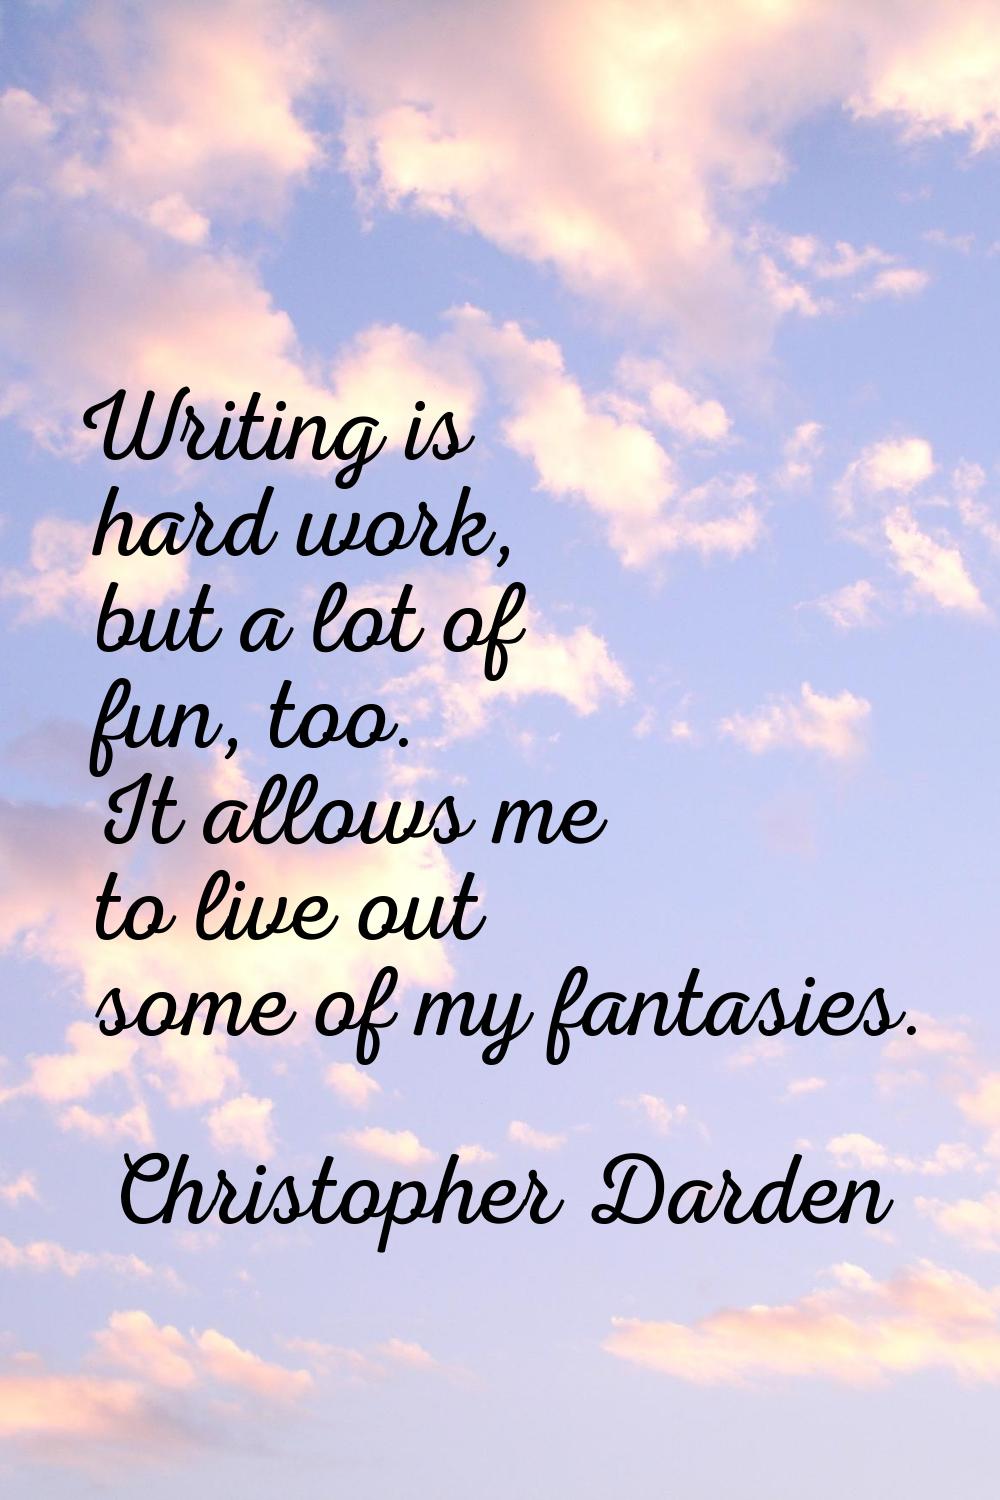 Writing is hard work, but a lot of fun, too. It allows me to live out some of my fantasies.